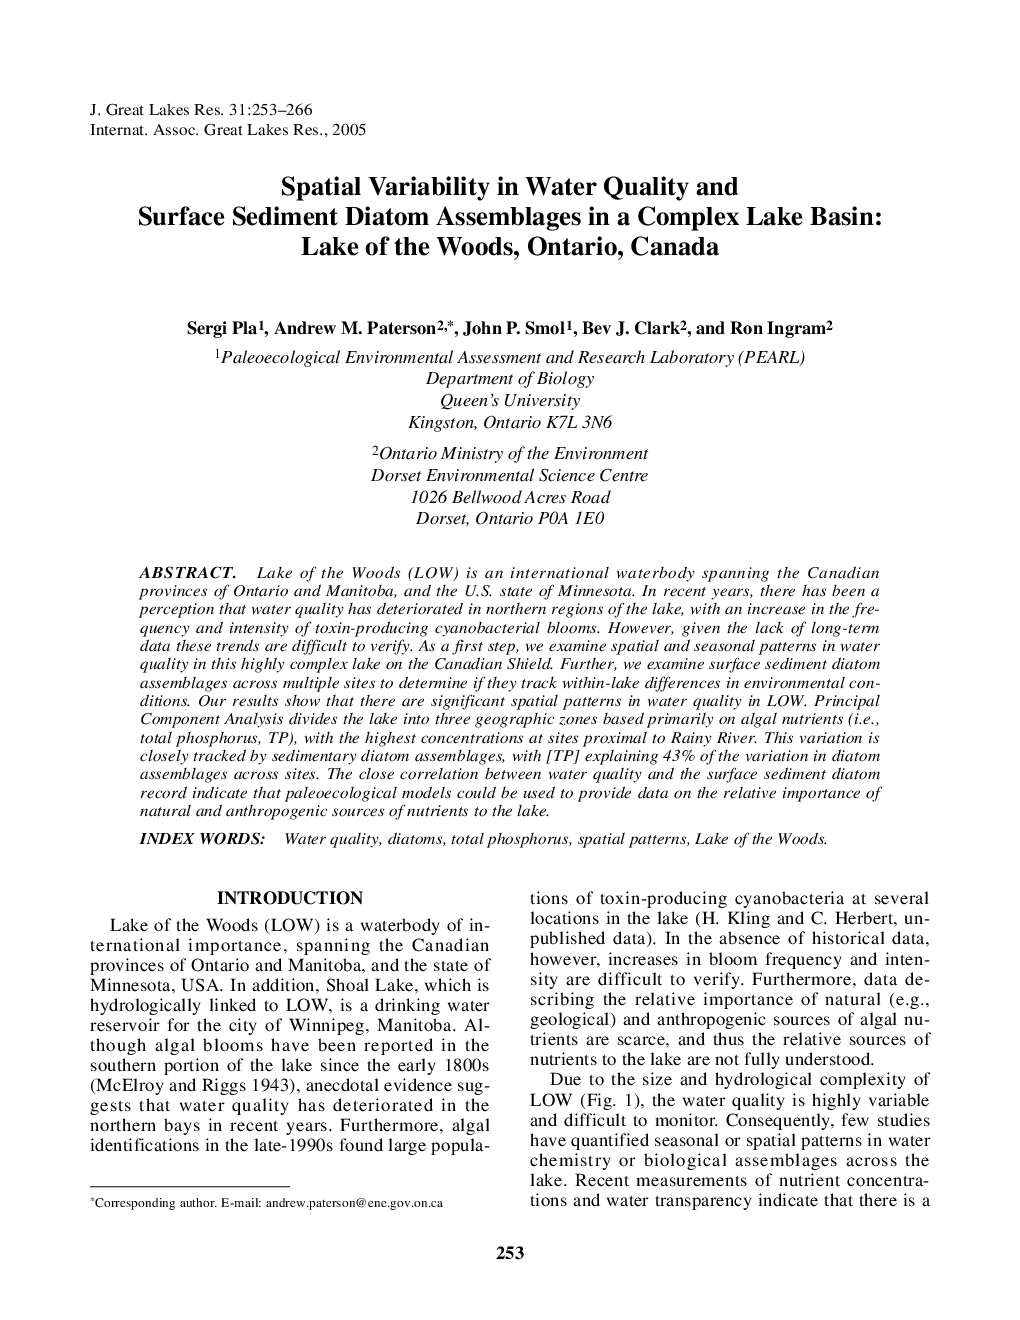 Spatial Variability in Water Quality and Surface Sediment Diatom Assemblages in a Complex Lake Basin: Lake of the Woods, Ontario, Canada